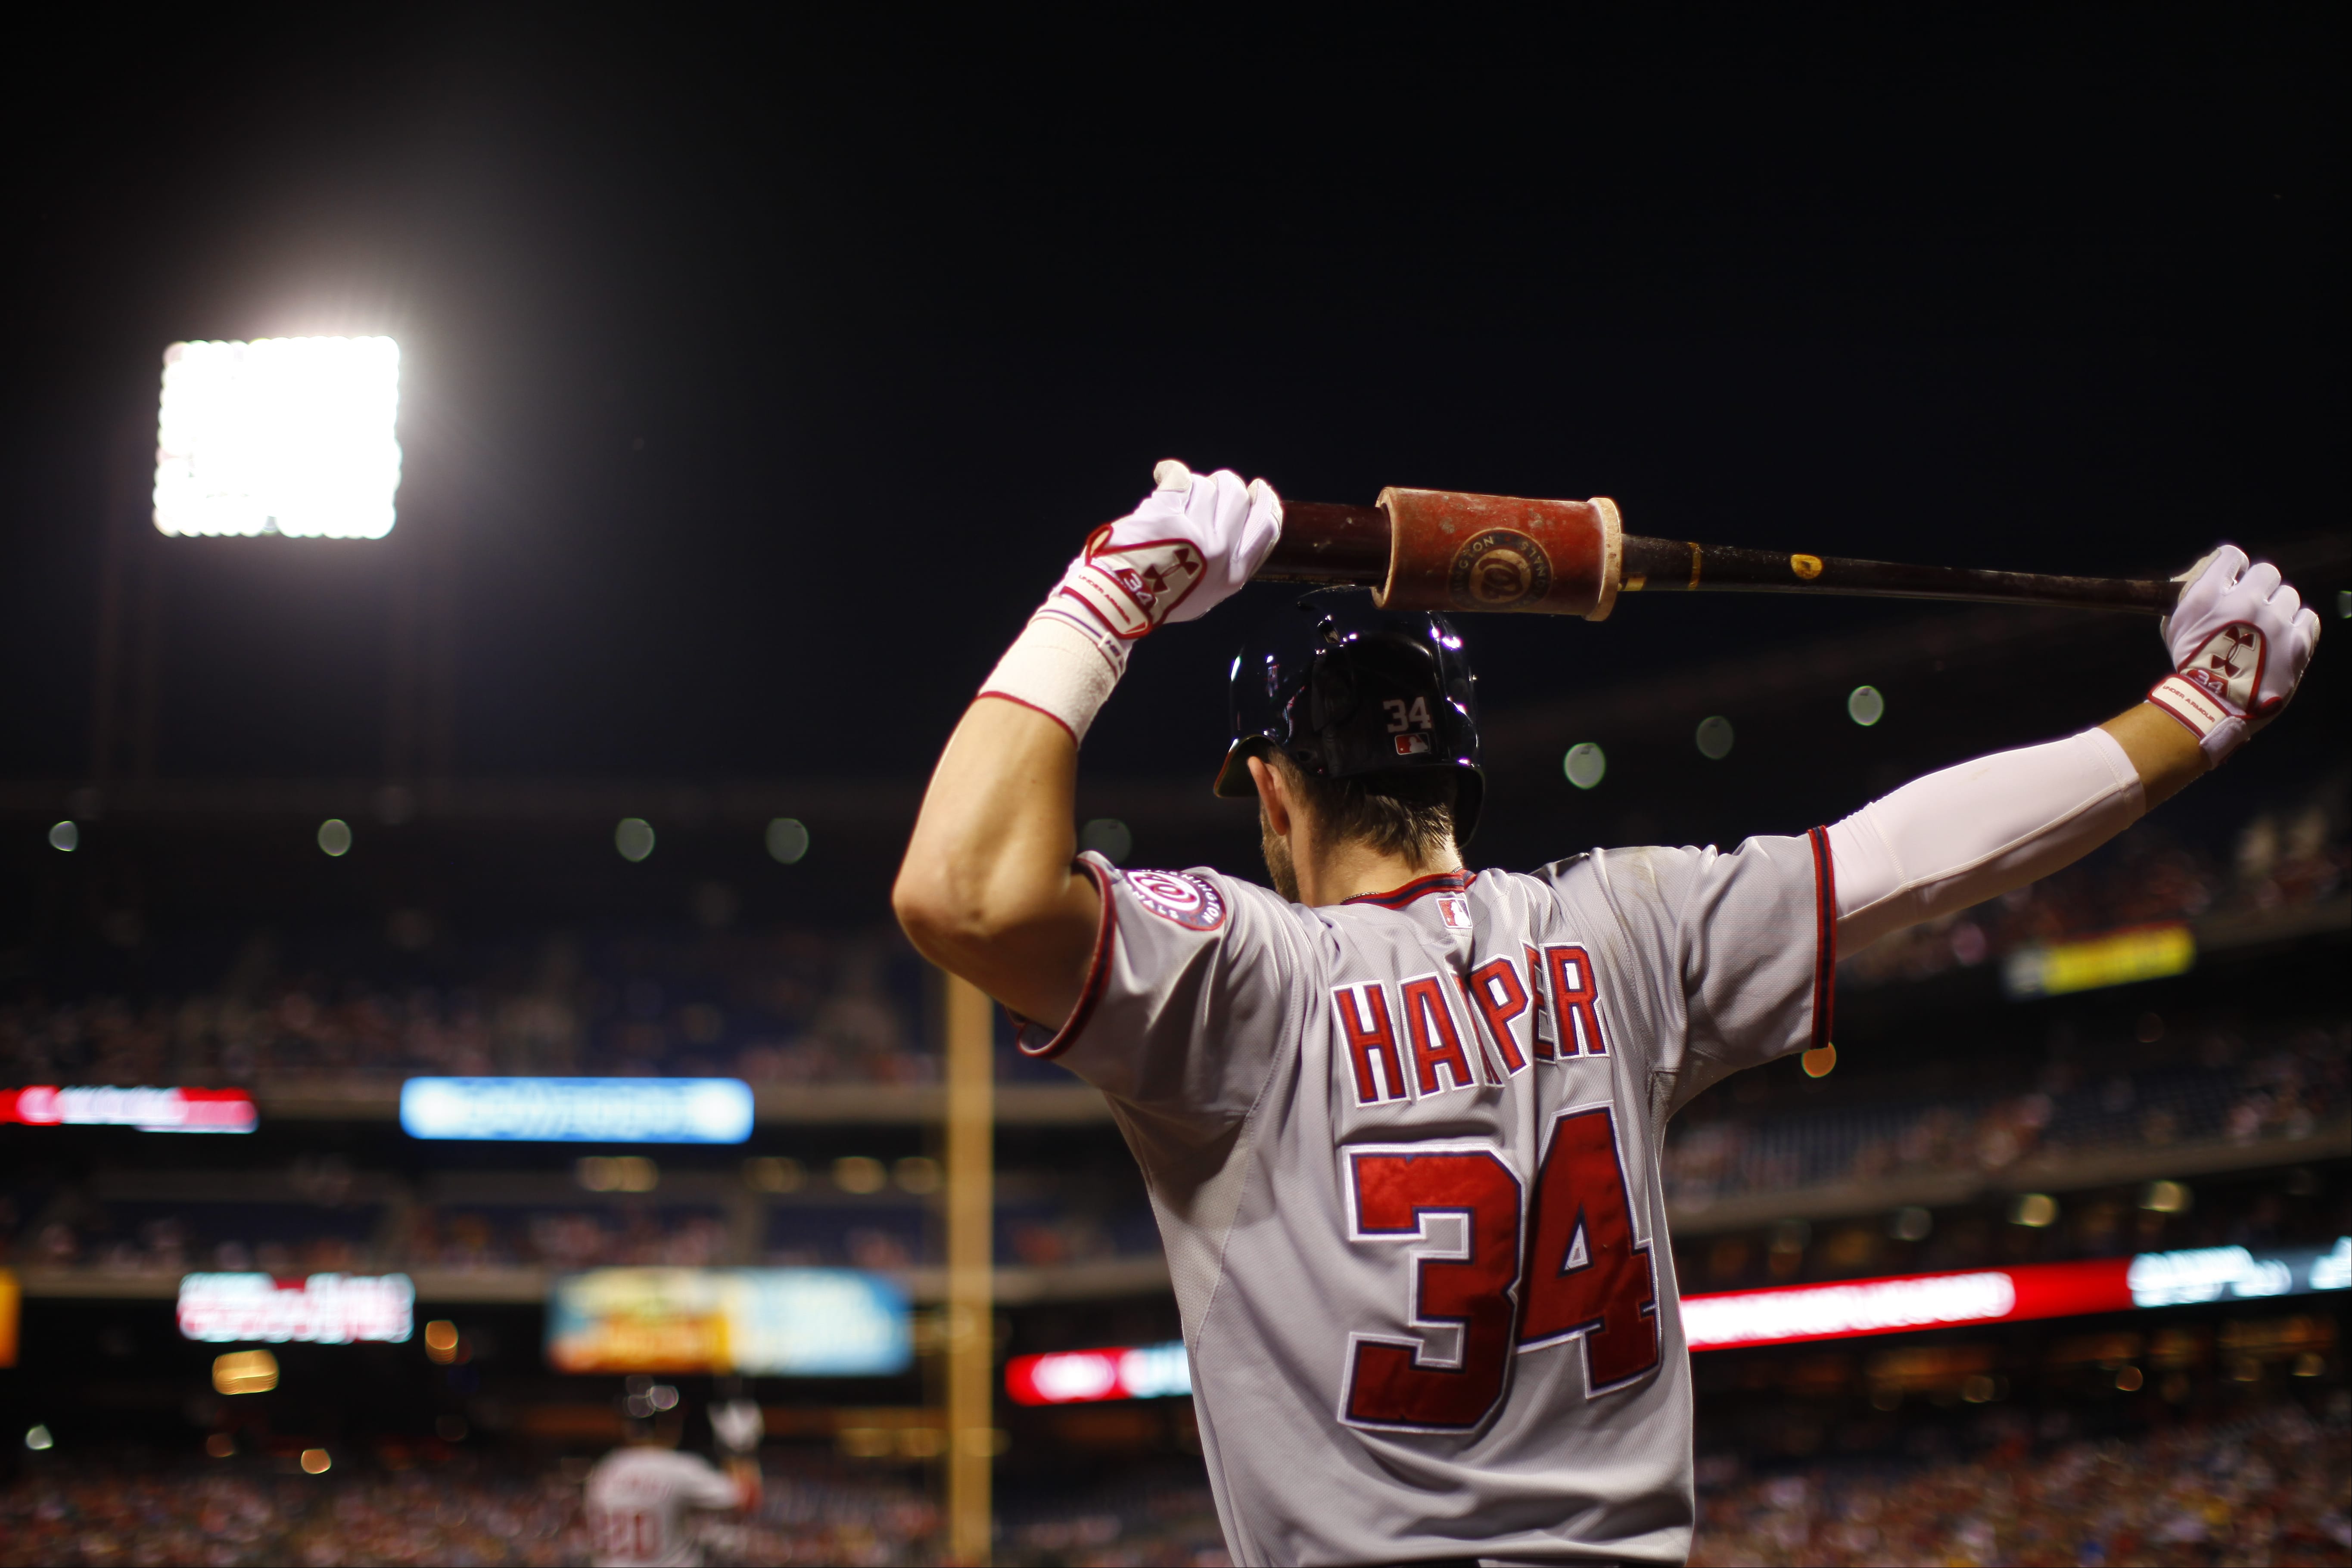 Washington Nationals' Bryce Harper prepares to bat during a baseball game against the Philadelphia Phillies in Philadelphia. The final month of the season offers a chance for redemption for Harper.